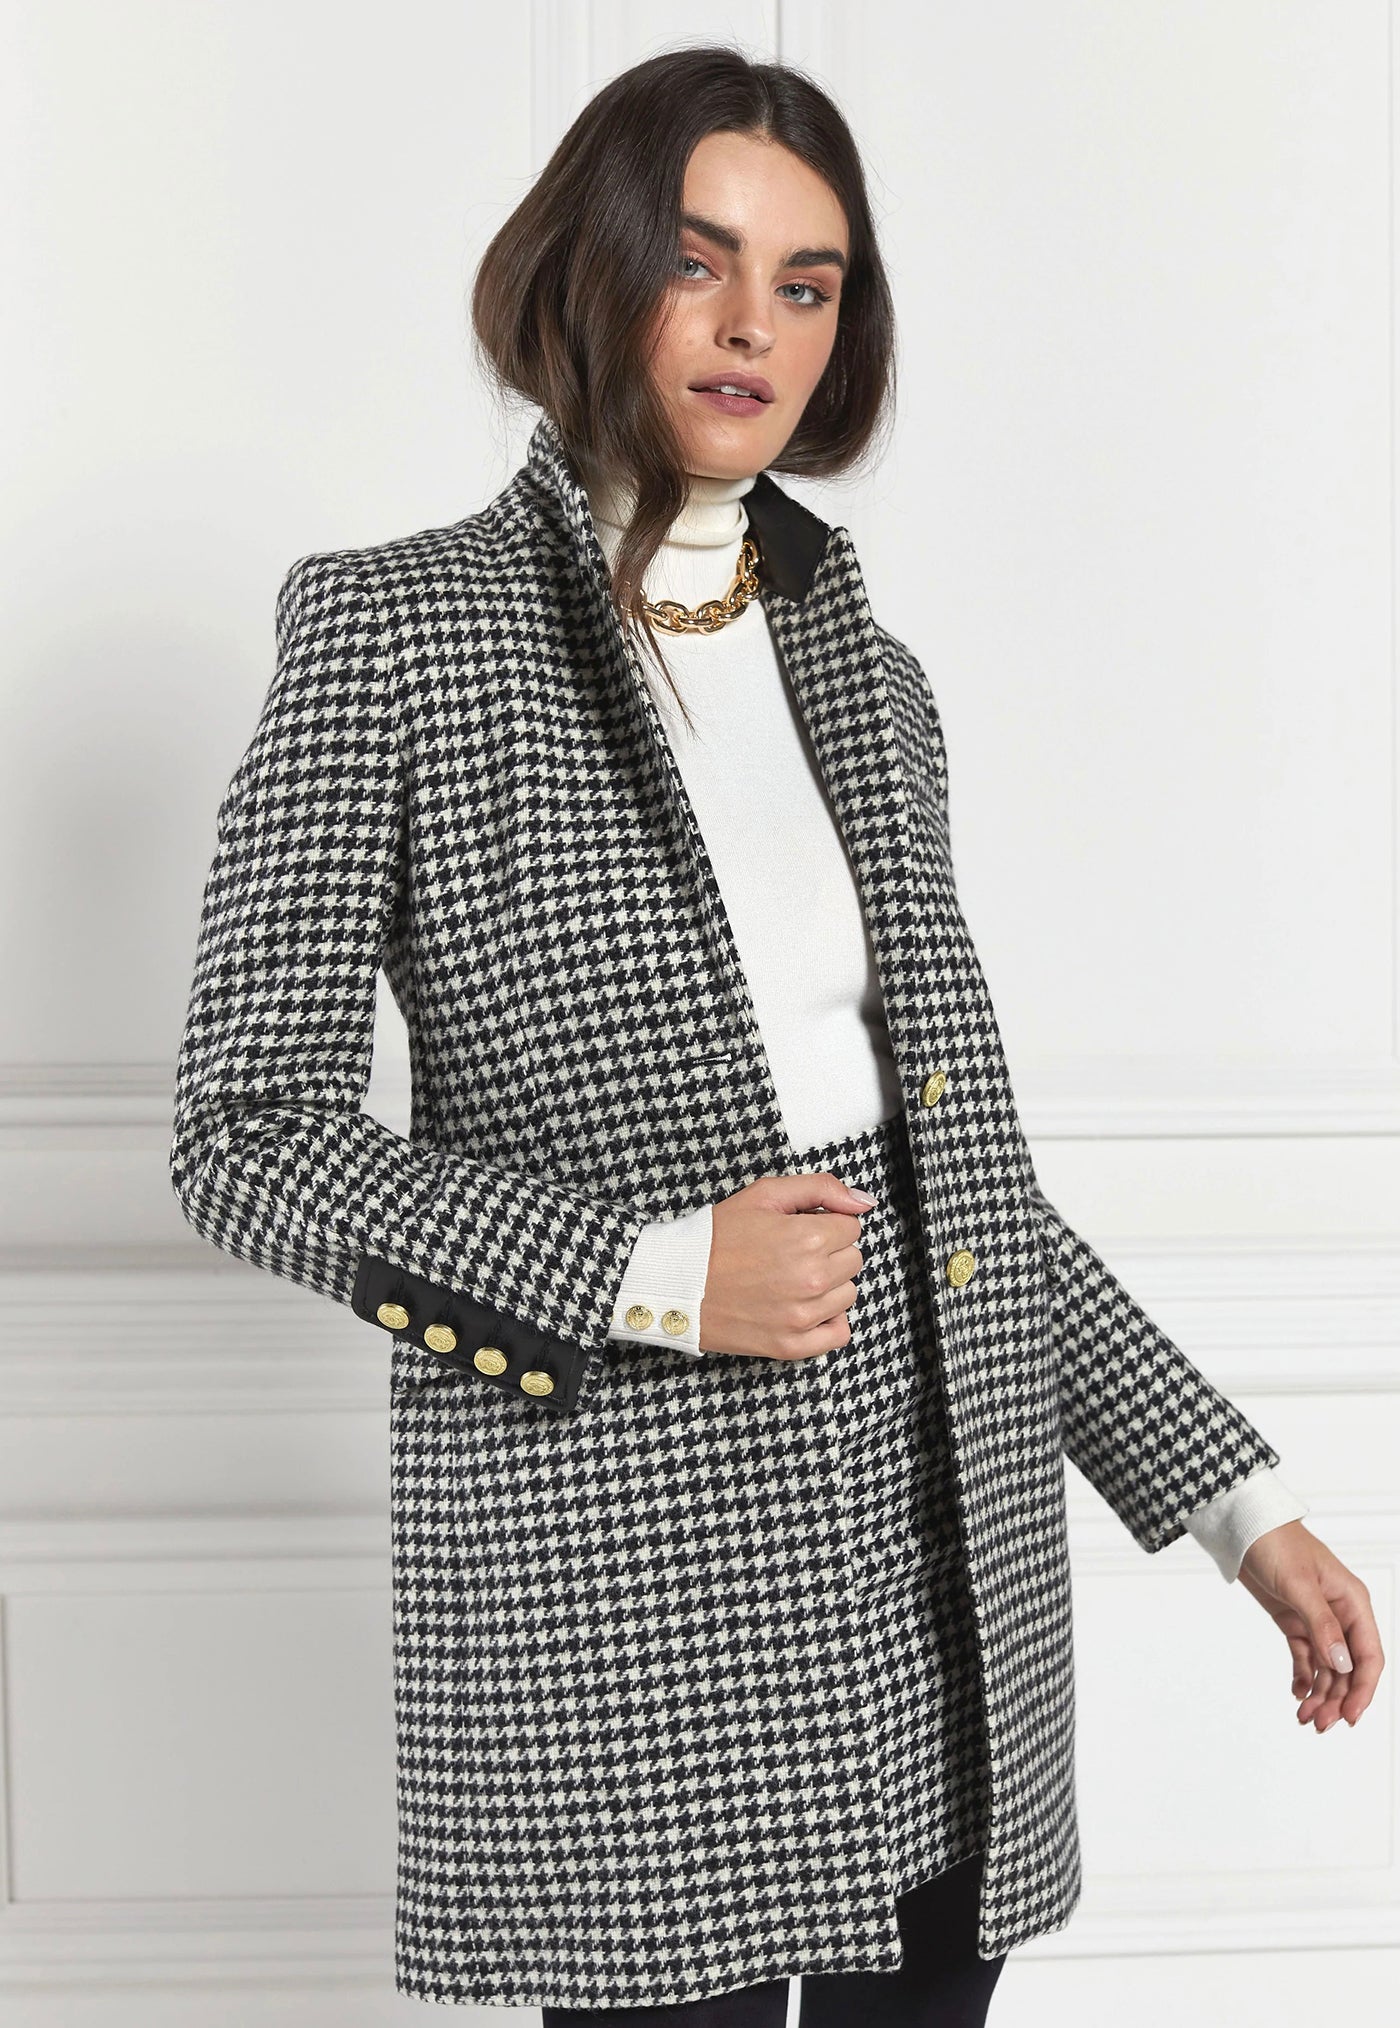 Kempton Coat - Houndstooth sold by Angel Divine